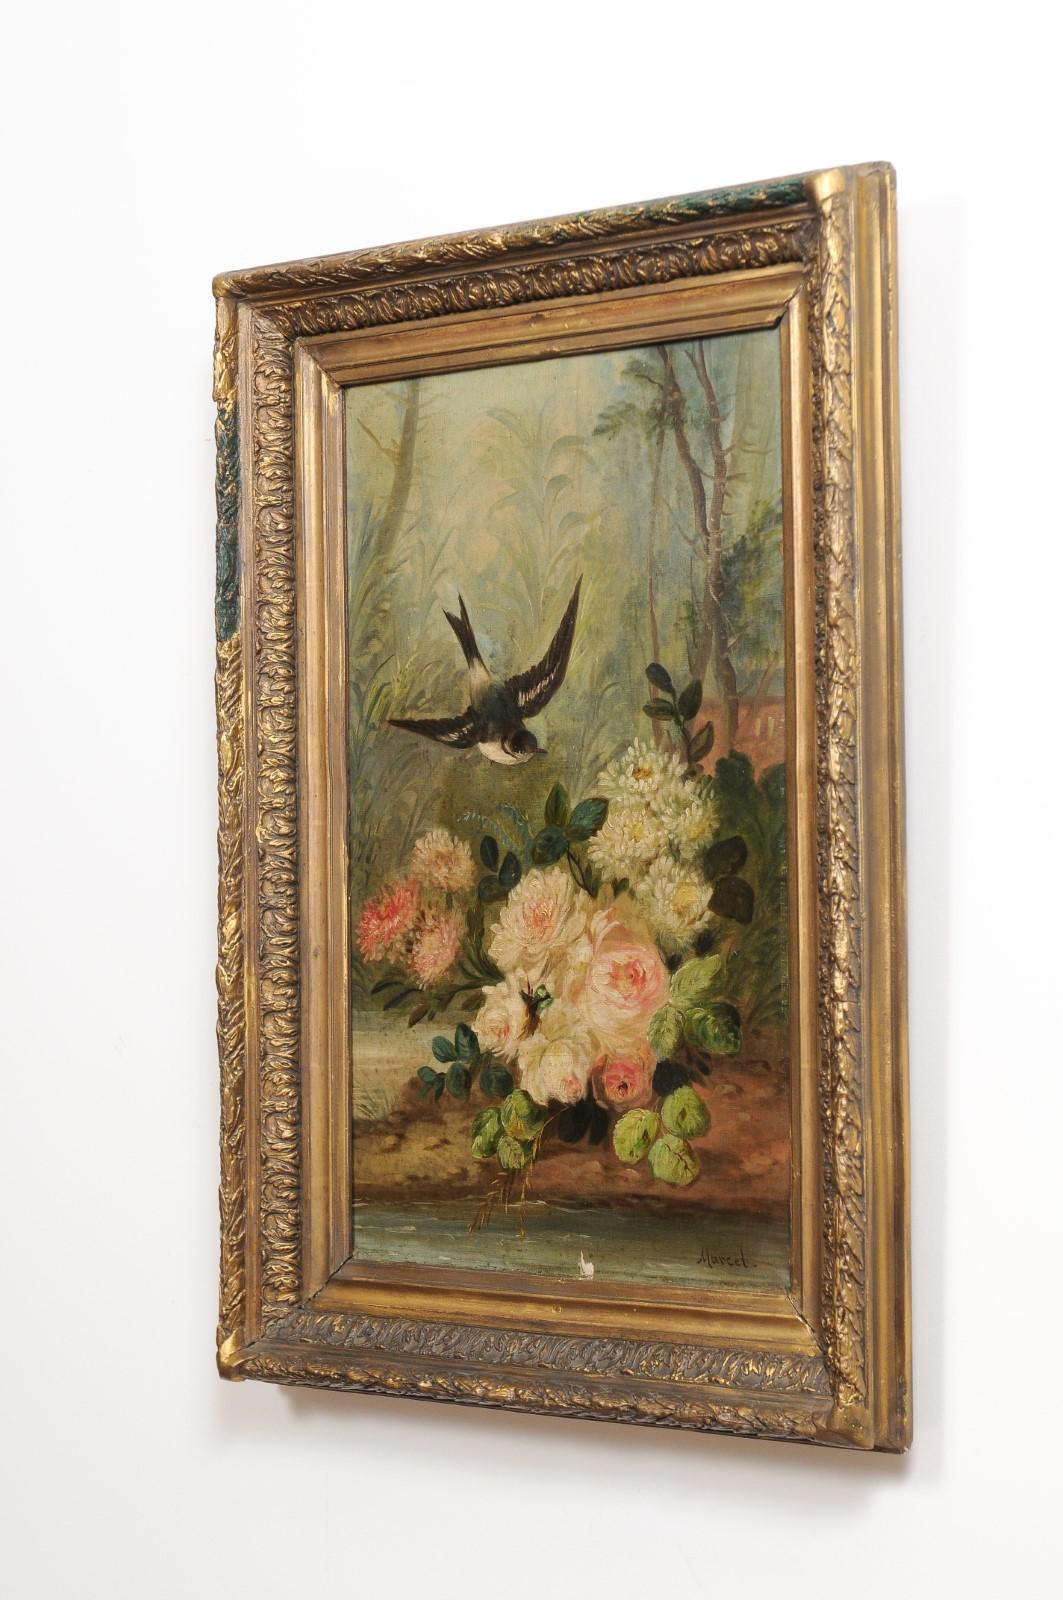 French Napoléon III 1850s Oil on Canvas Framed Painting with Bird and Roses For Sale 1